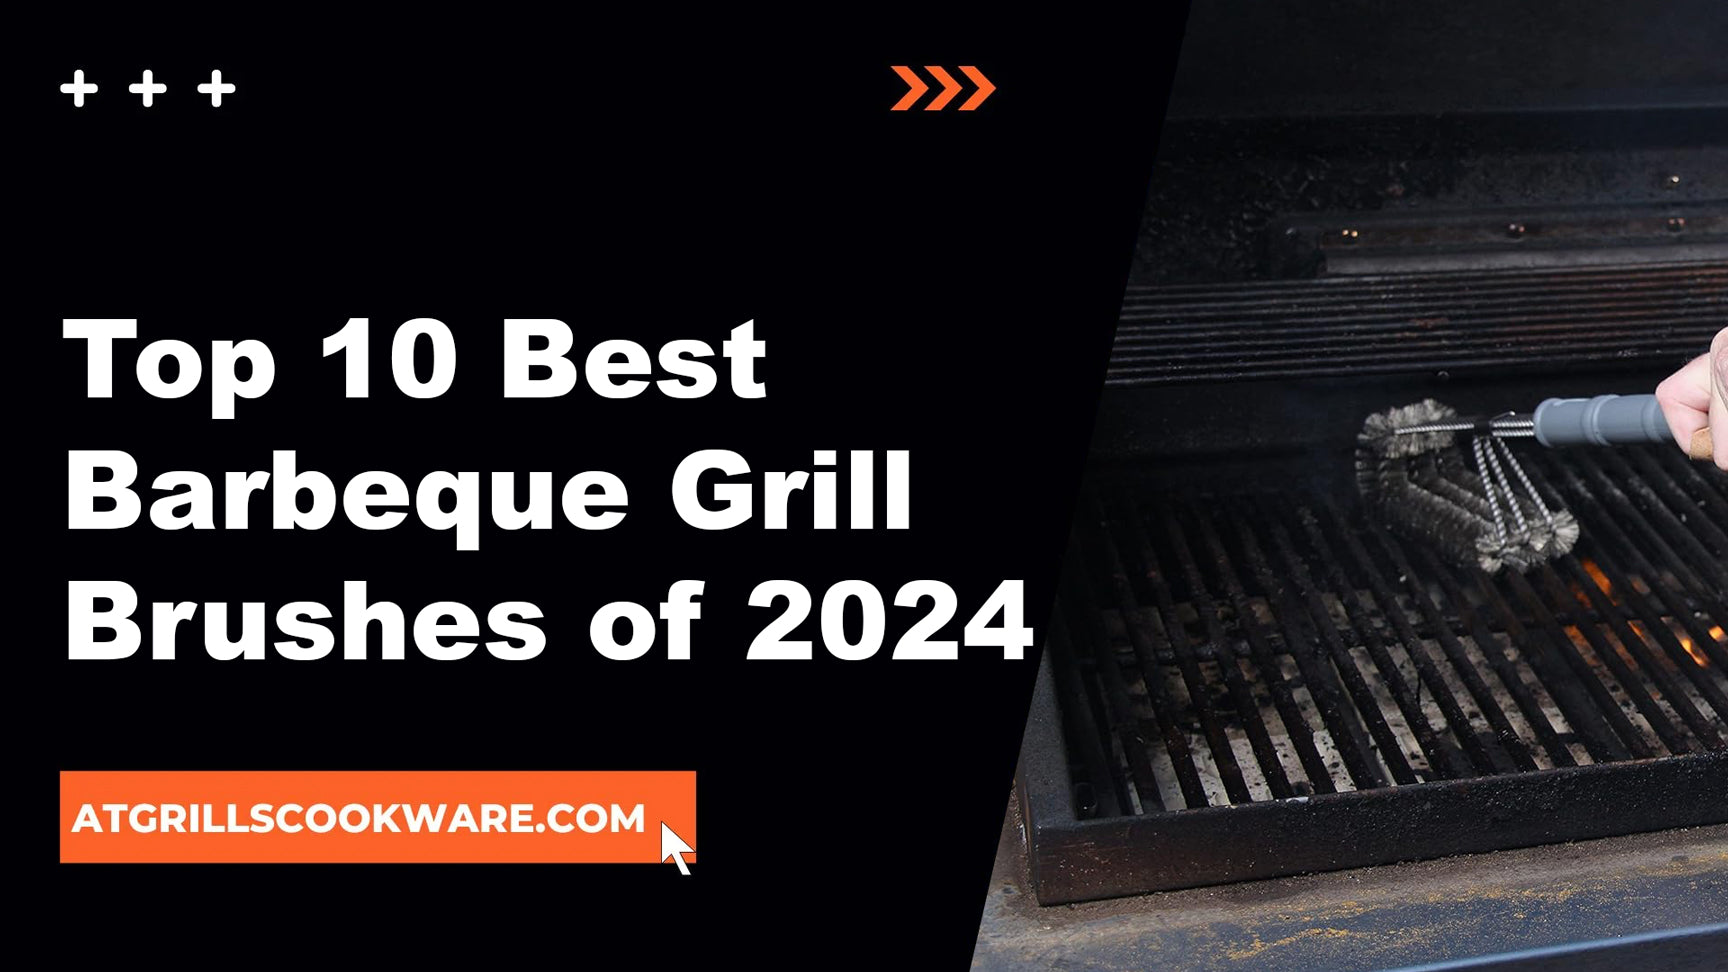 Top 10 Best Barbeque Grill Brushes of 2024